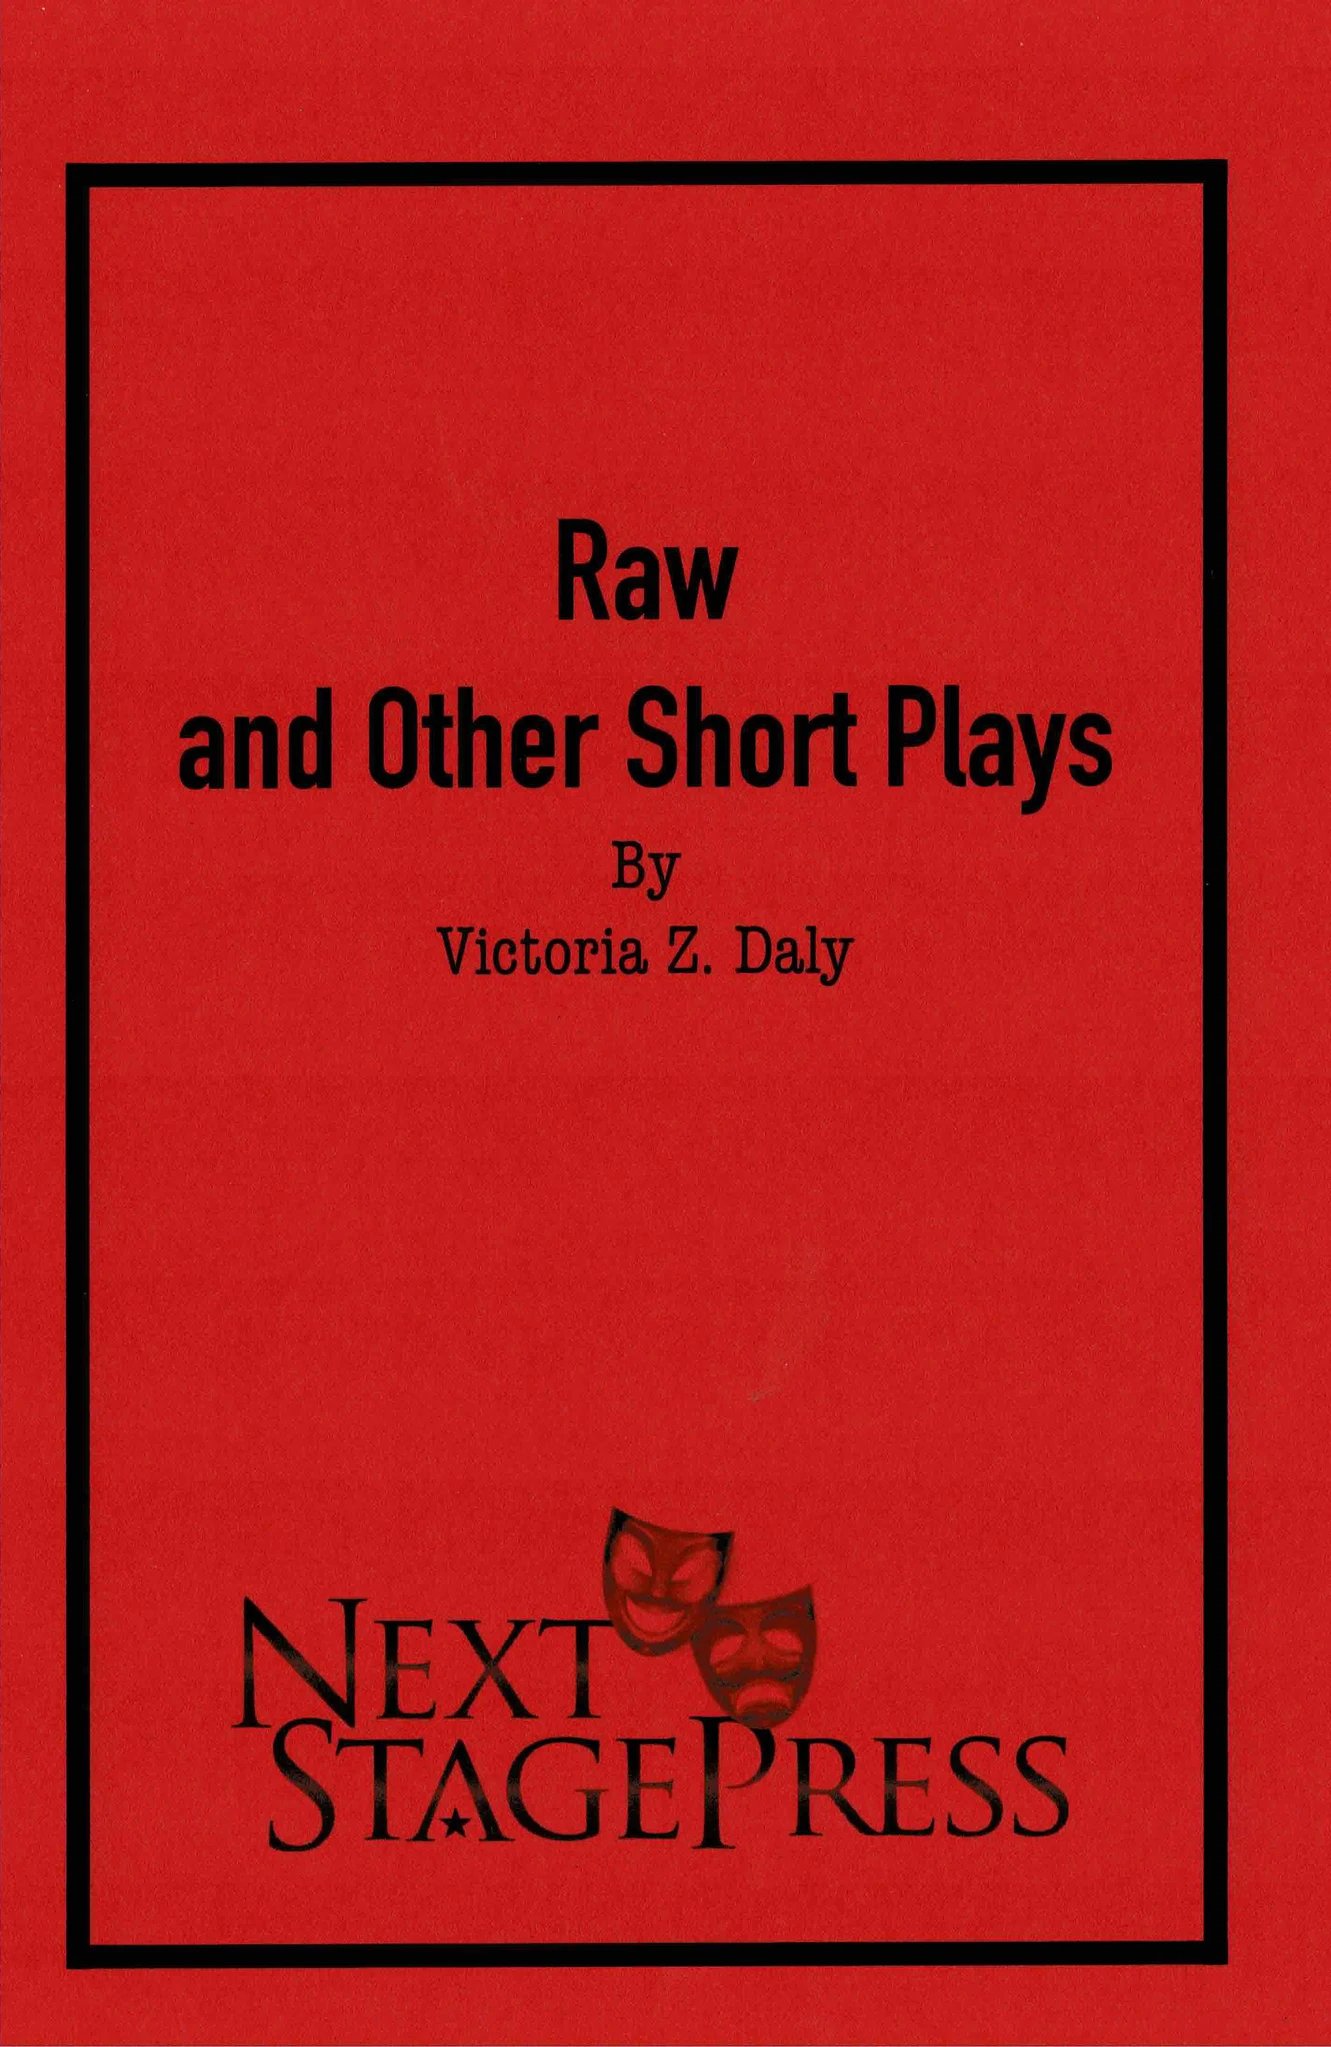 Raw & Other Short Plays  - Cover (original size).jpg